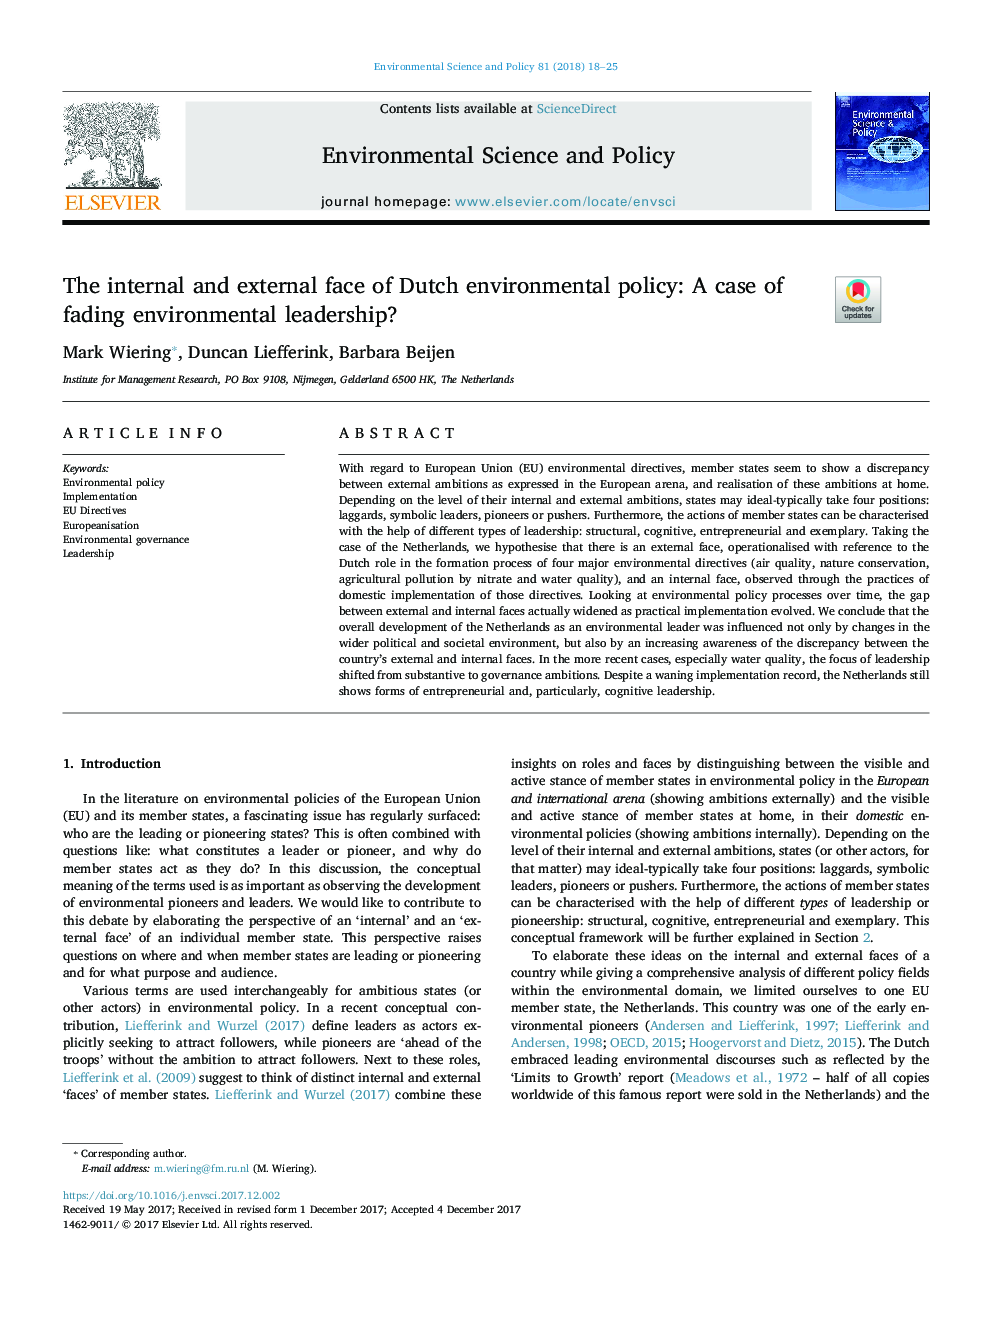 The internal and external face of Dutch environmental policy: A case of fading environmental leadership?